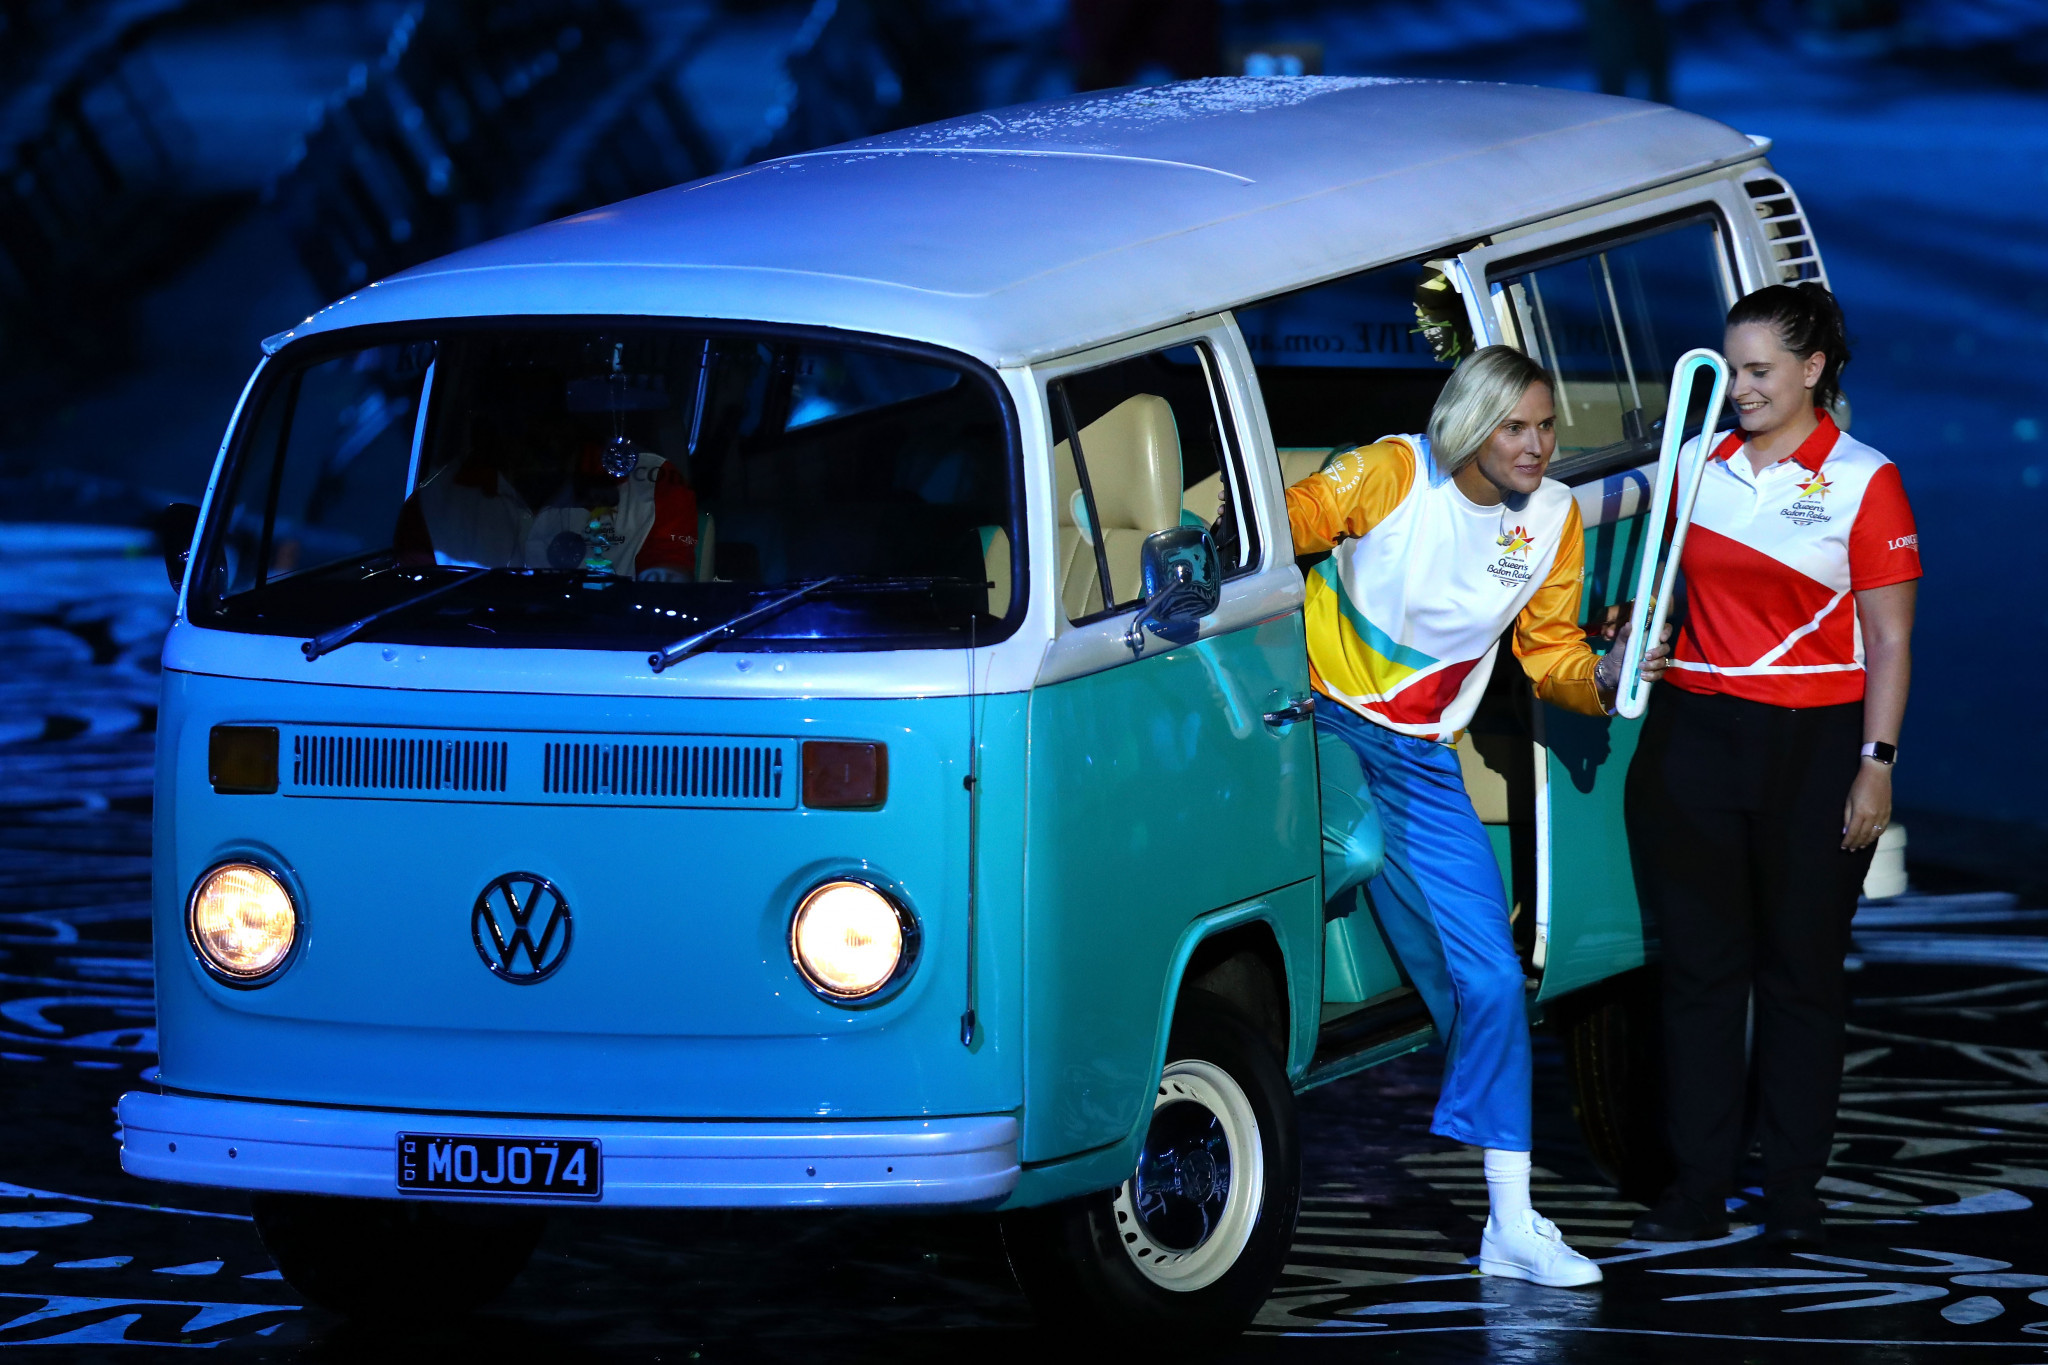 Former swimmer Susie O'Neill arrived with the Queen's Baton in the VW Camper van used at Buckingham Palace in London when the Relay was launched in March 2017 ©Getty Images